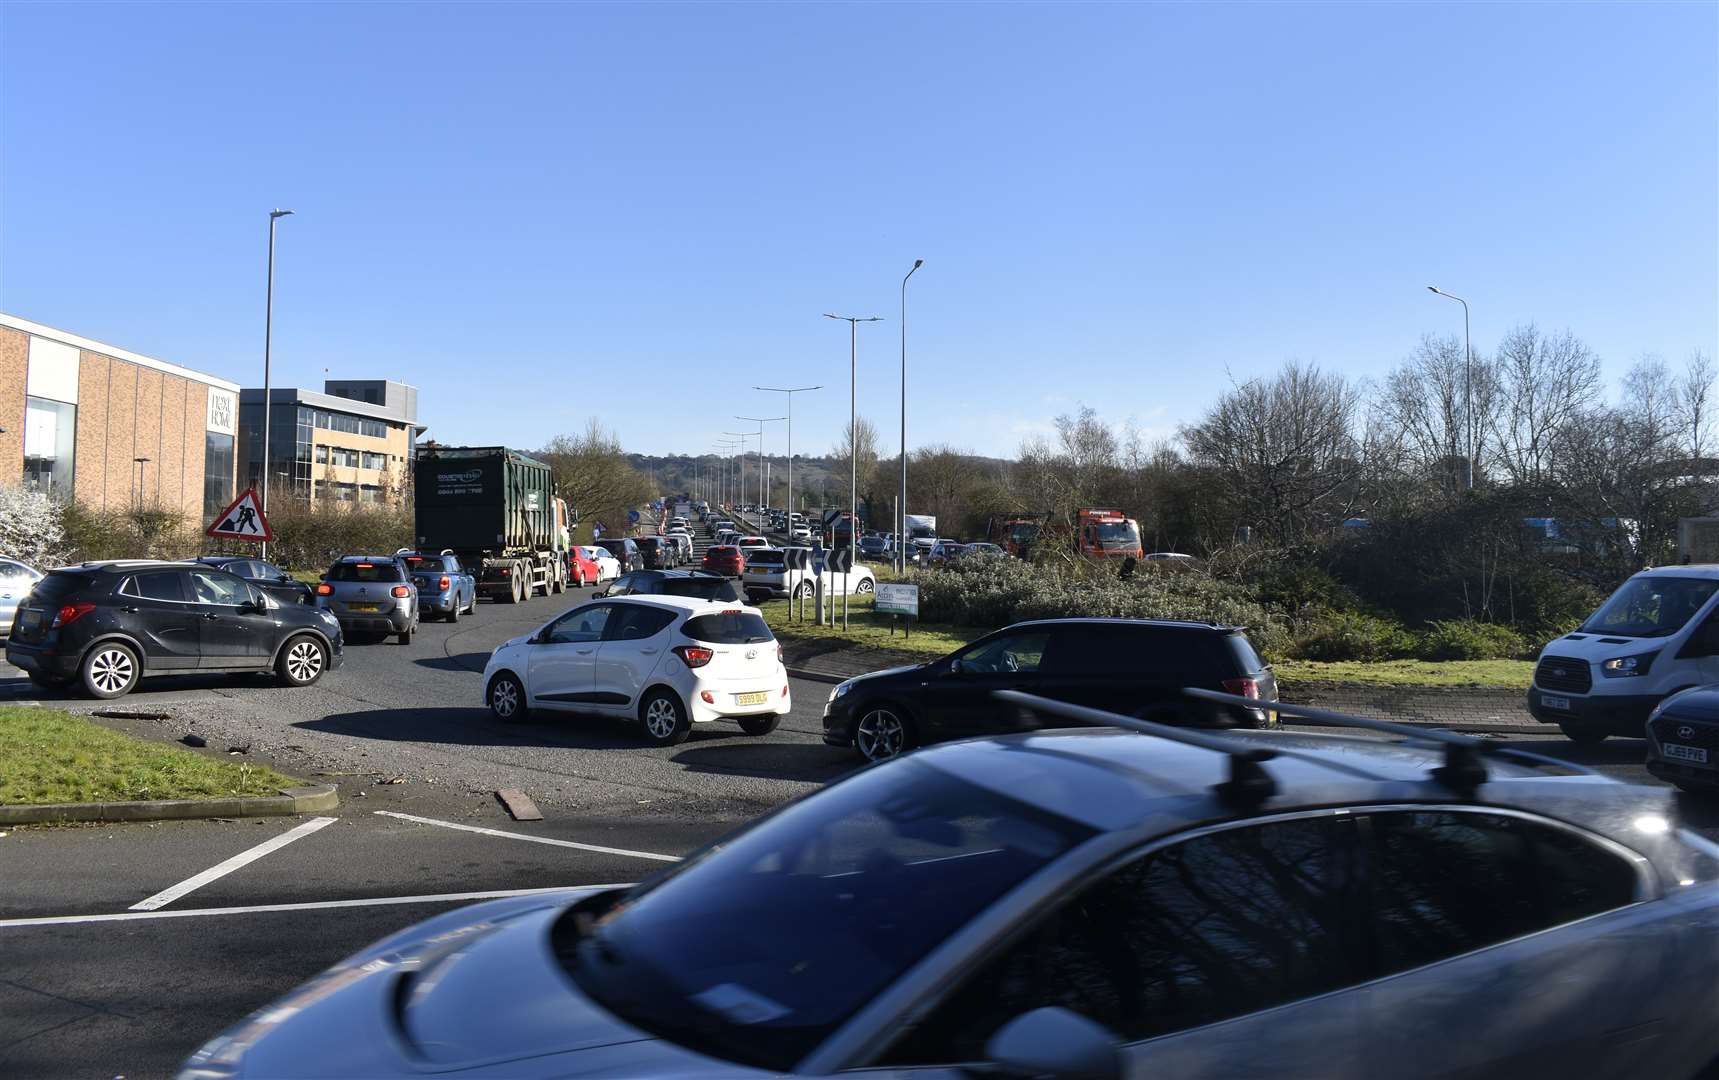 Traffic on the A249 roundabout at Bearsted Road leading to the M20